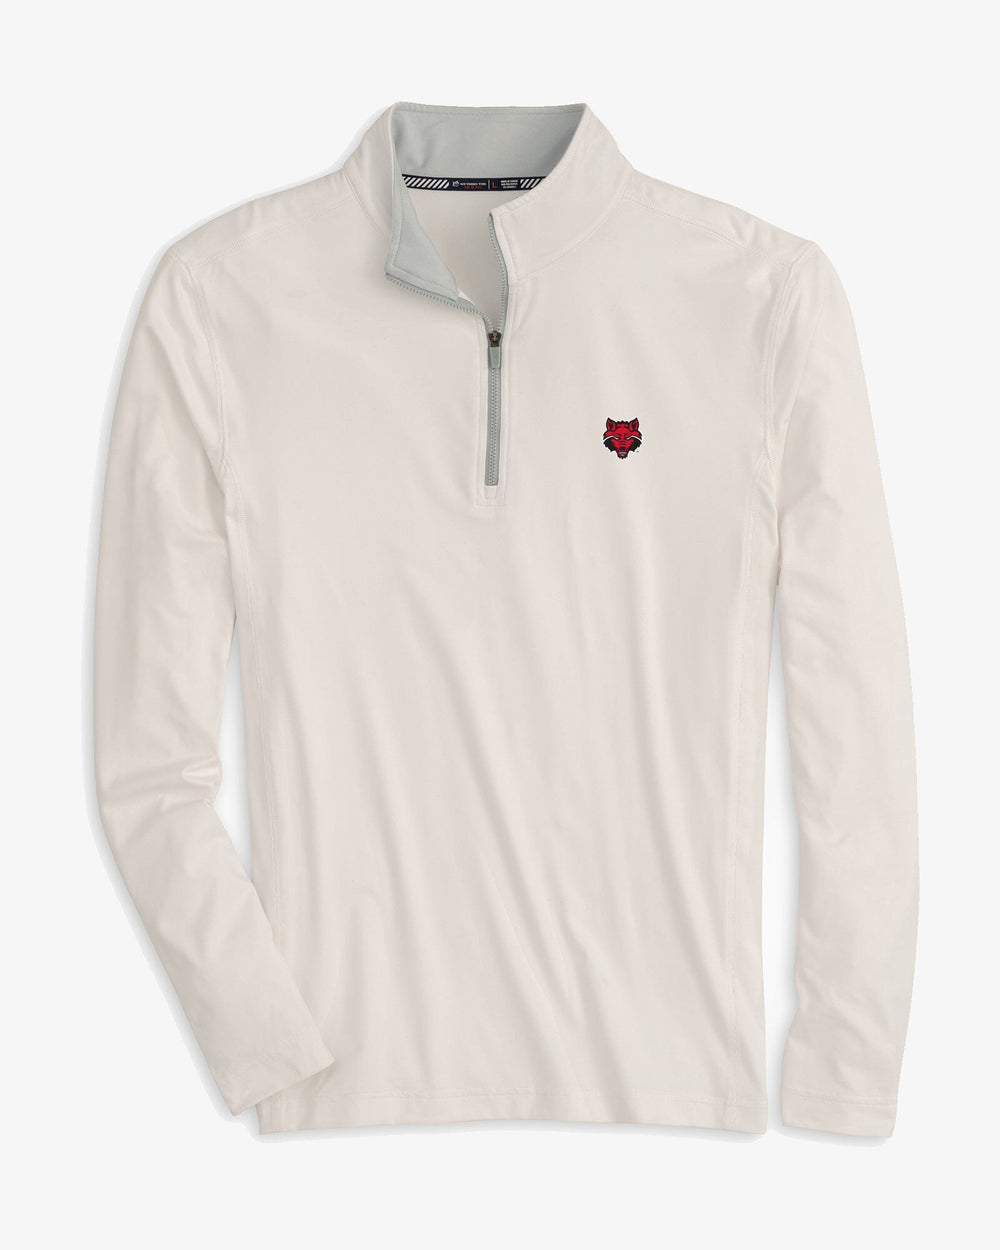 The front view of the Arkansas State Red Wolves Quarter Zip Pullover by Southern Tide - Classic White